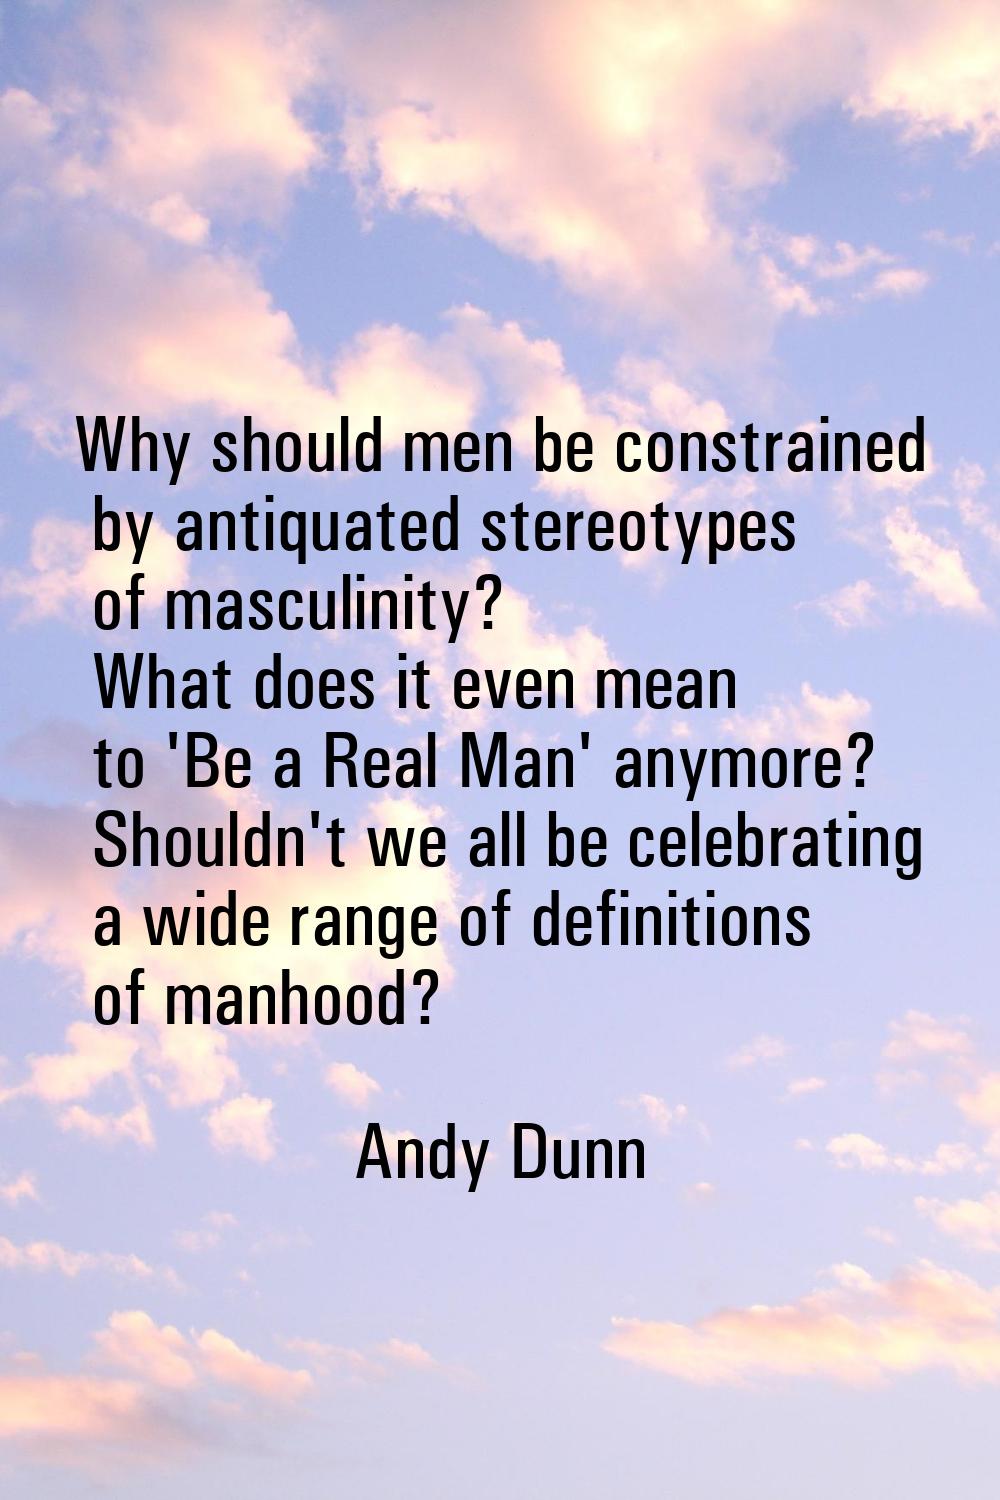 Why should men be constrained by antiquated stereotypes of masculinity? What does it even mean to '